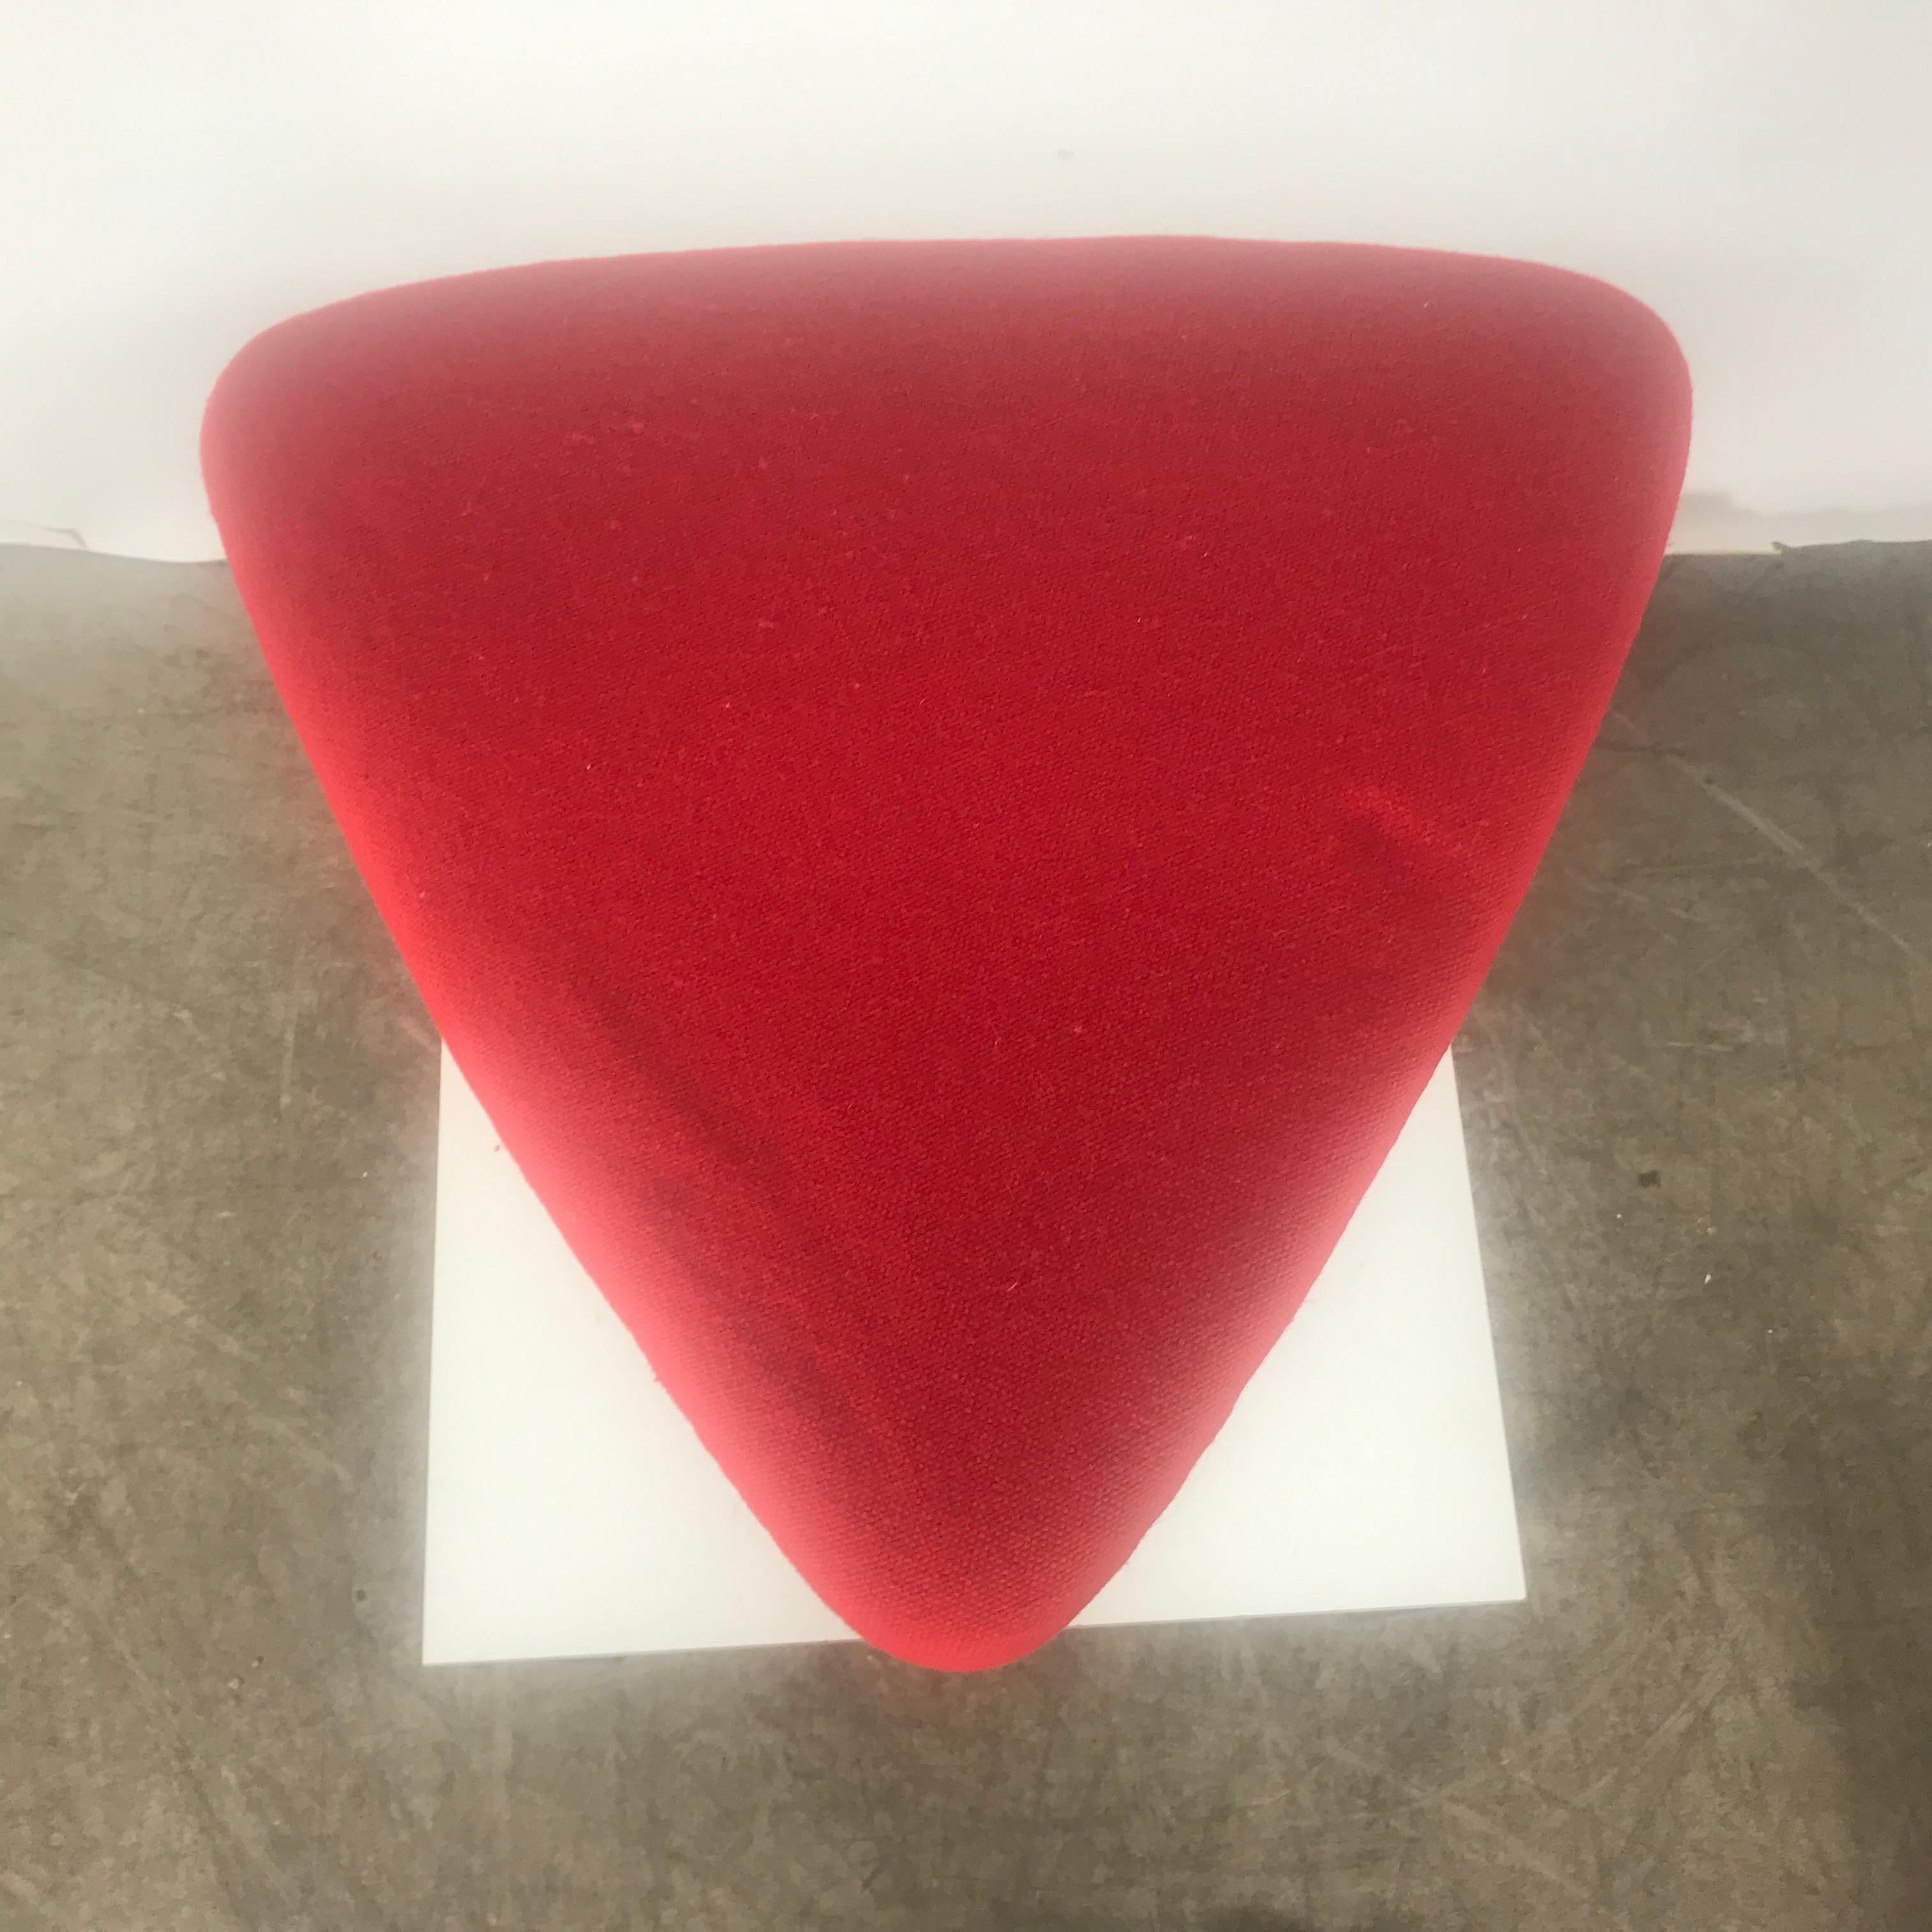 Classic Modernist wire iron and fabric Tricorn stool / ottoman attributed to Vladimir Kagan, stunning simple elegant design, curvaceous flowing iron base, wonderful red wool knoll fabric upholstered triangle shaped top.